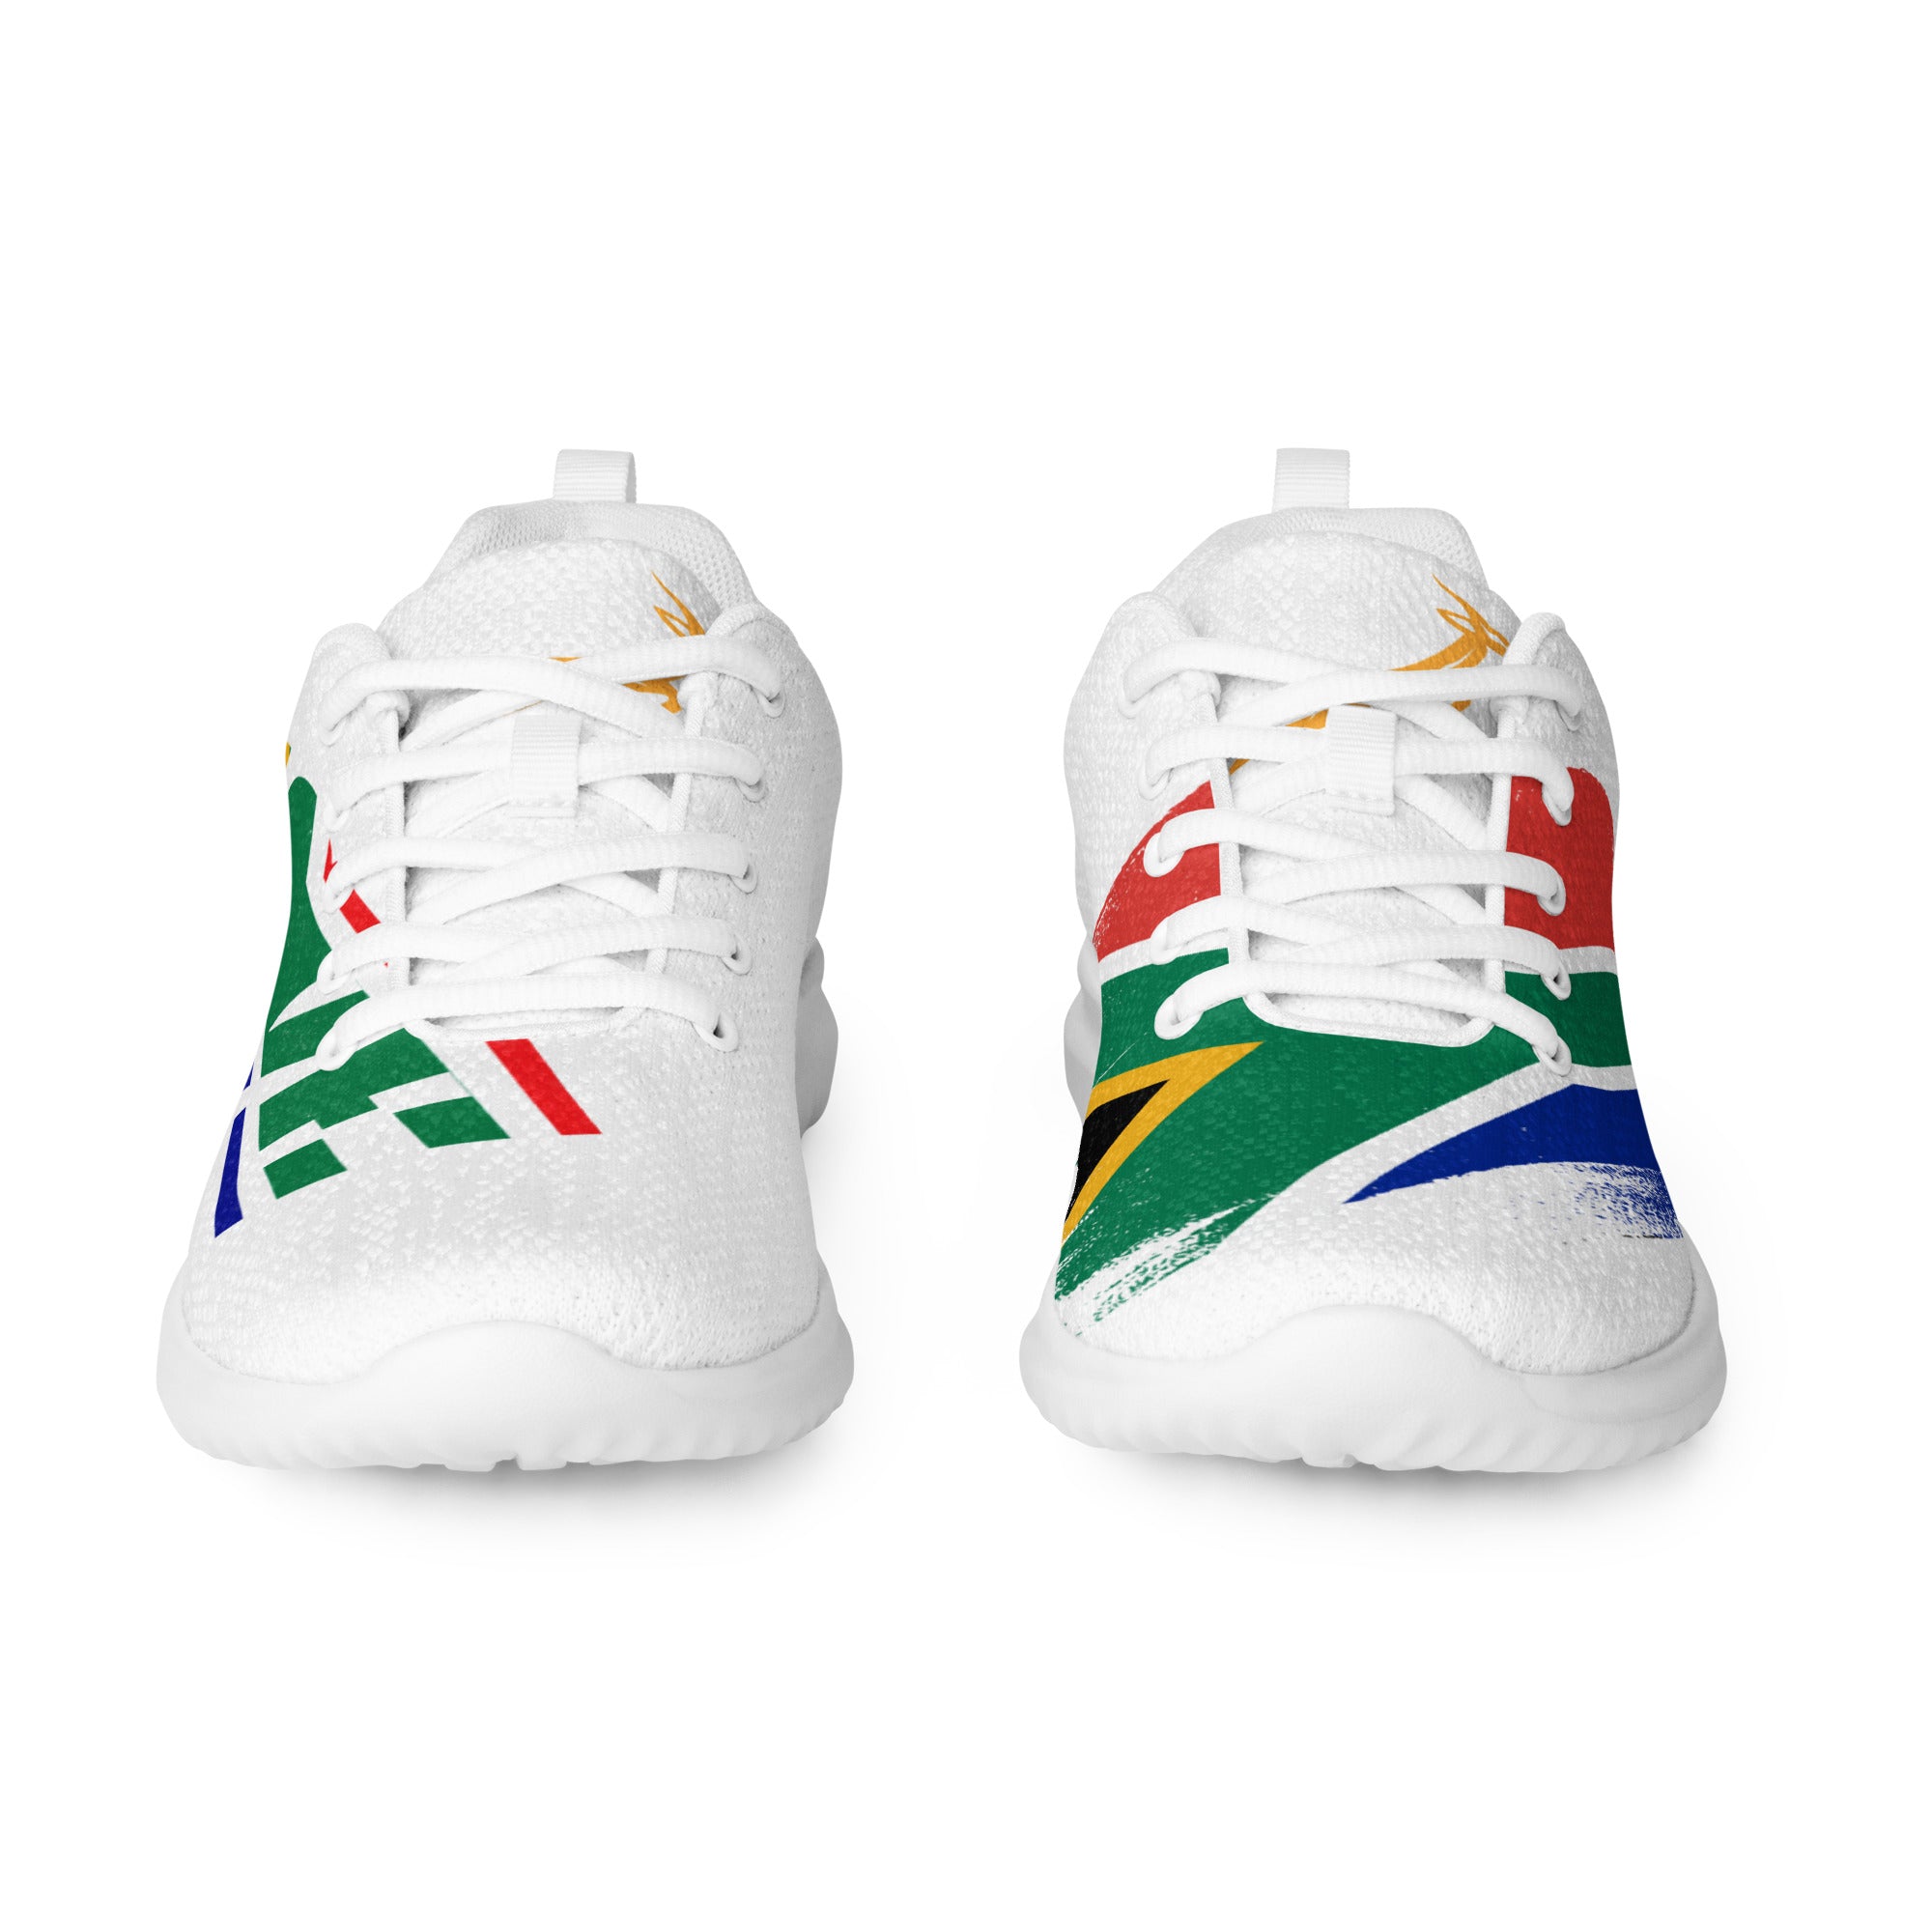 Women's athletic shoes - South Africa flag style 1 – Landmarc Gifts